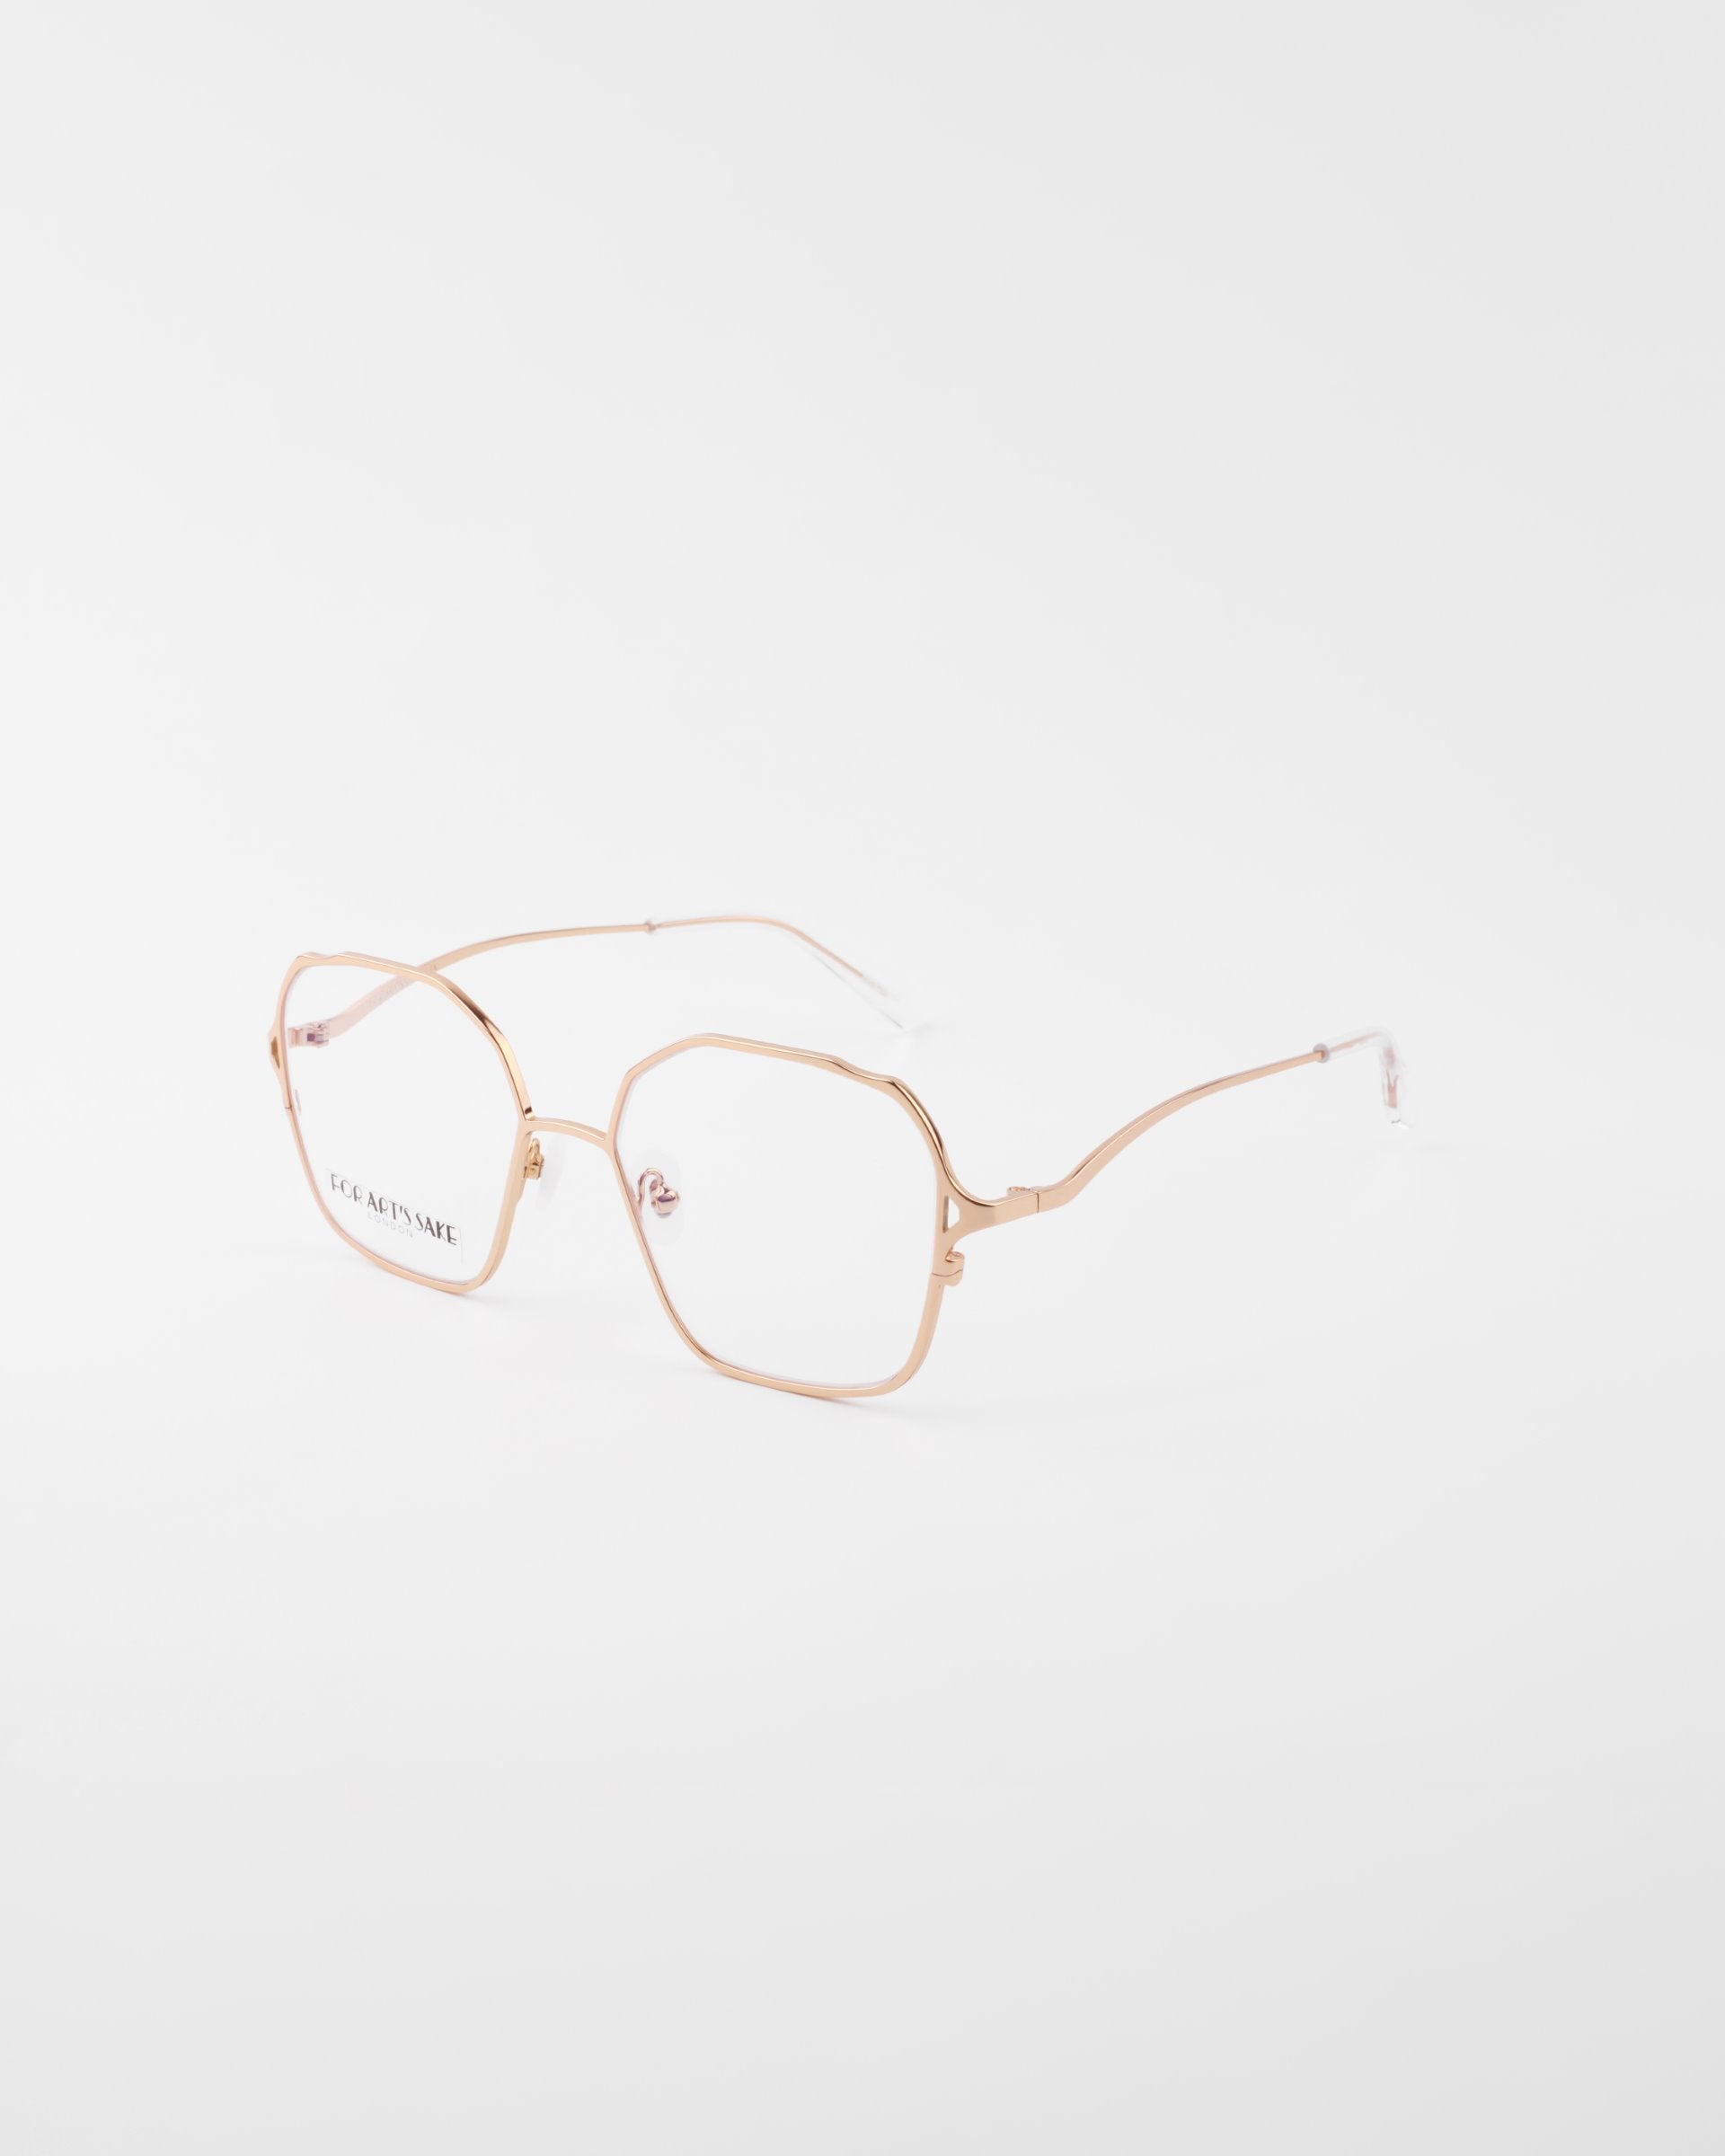 A pair of For Art&#39;s Sake® Mimi eyeglasses with thin, 18-karat gold-plated metal frames and slightly geometric lenses. The glasses are positioned at an angle on a white background, showcasing the streamlined arms and clear lenses.